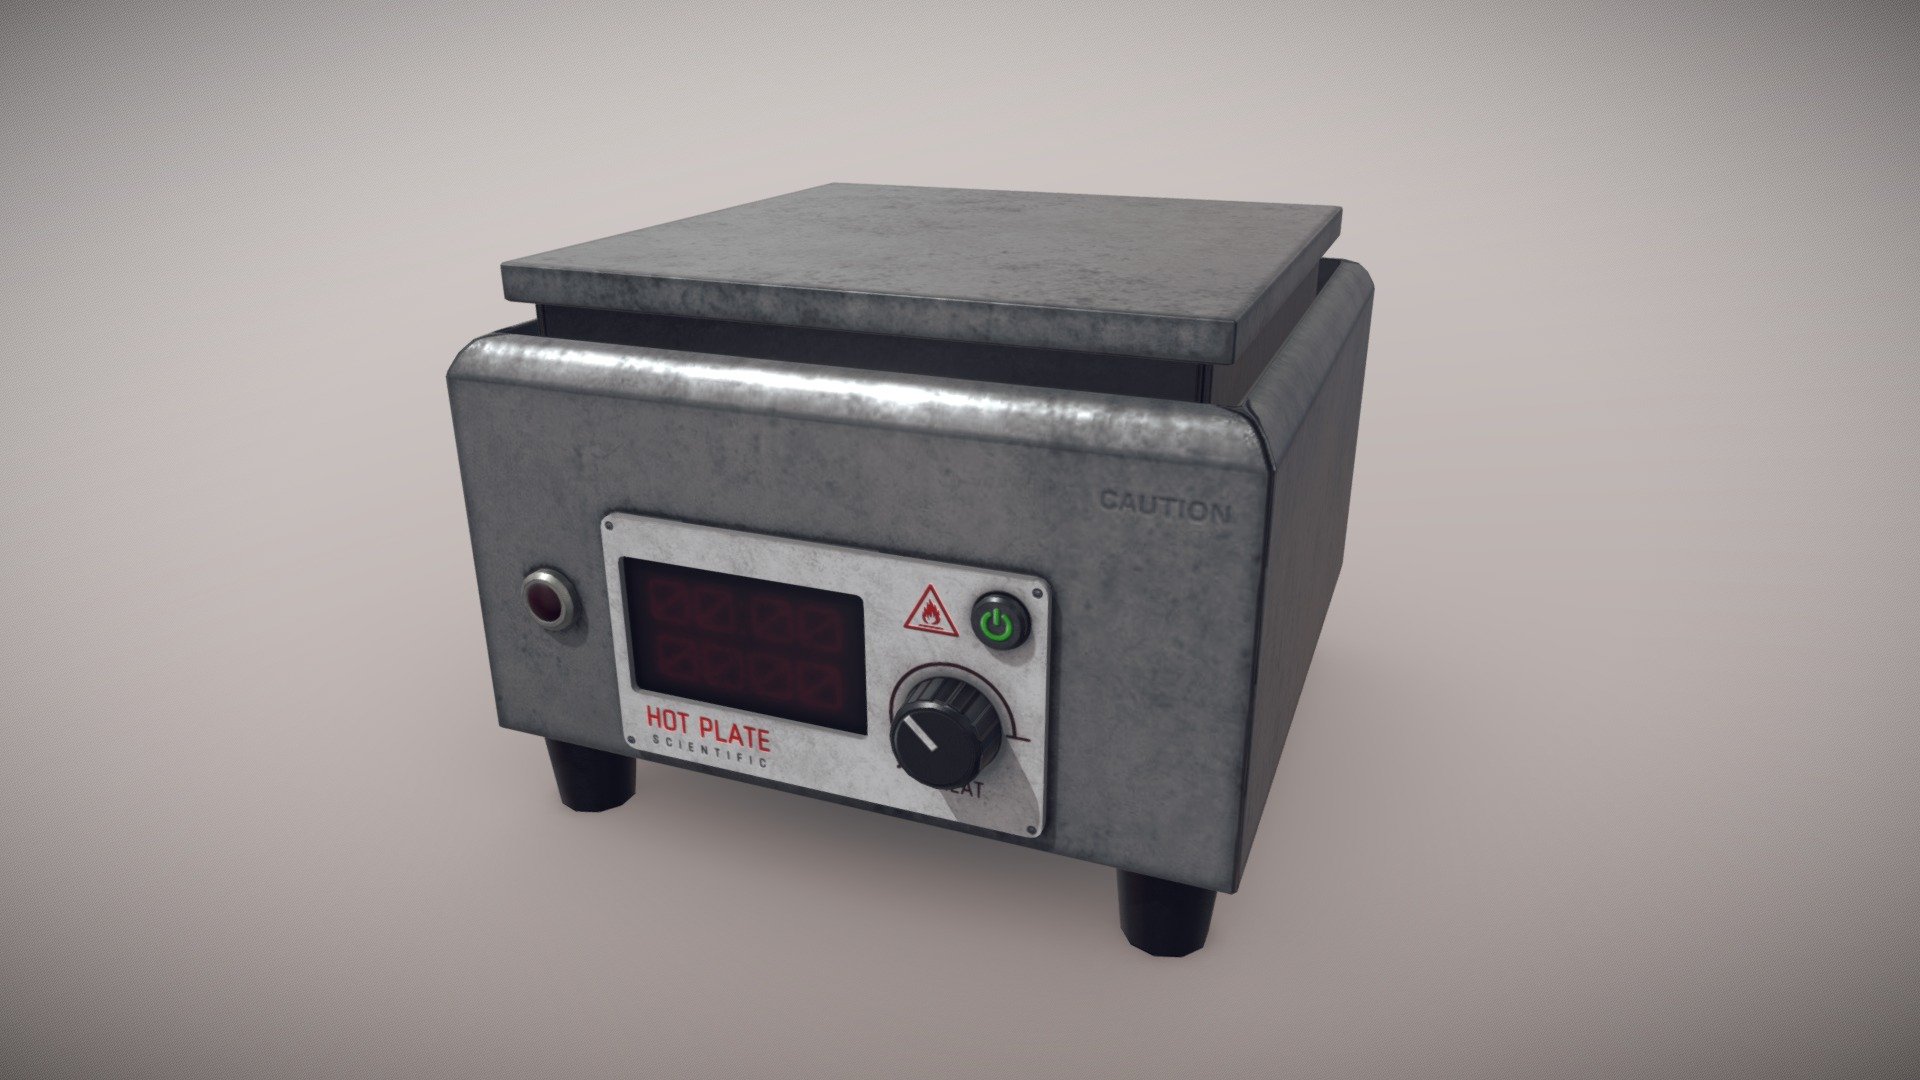 A VR-ready model of a hot plate for a science lab. 

Modeled in Maya and textured in Substance Painter 3d model